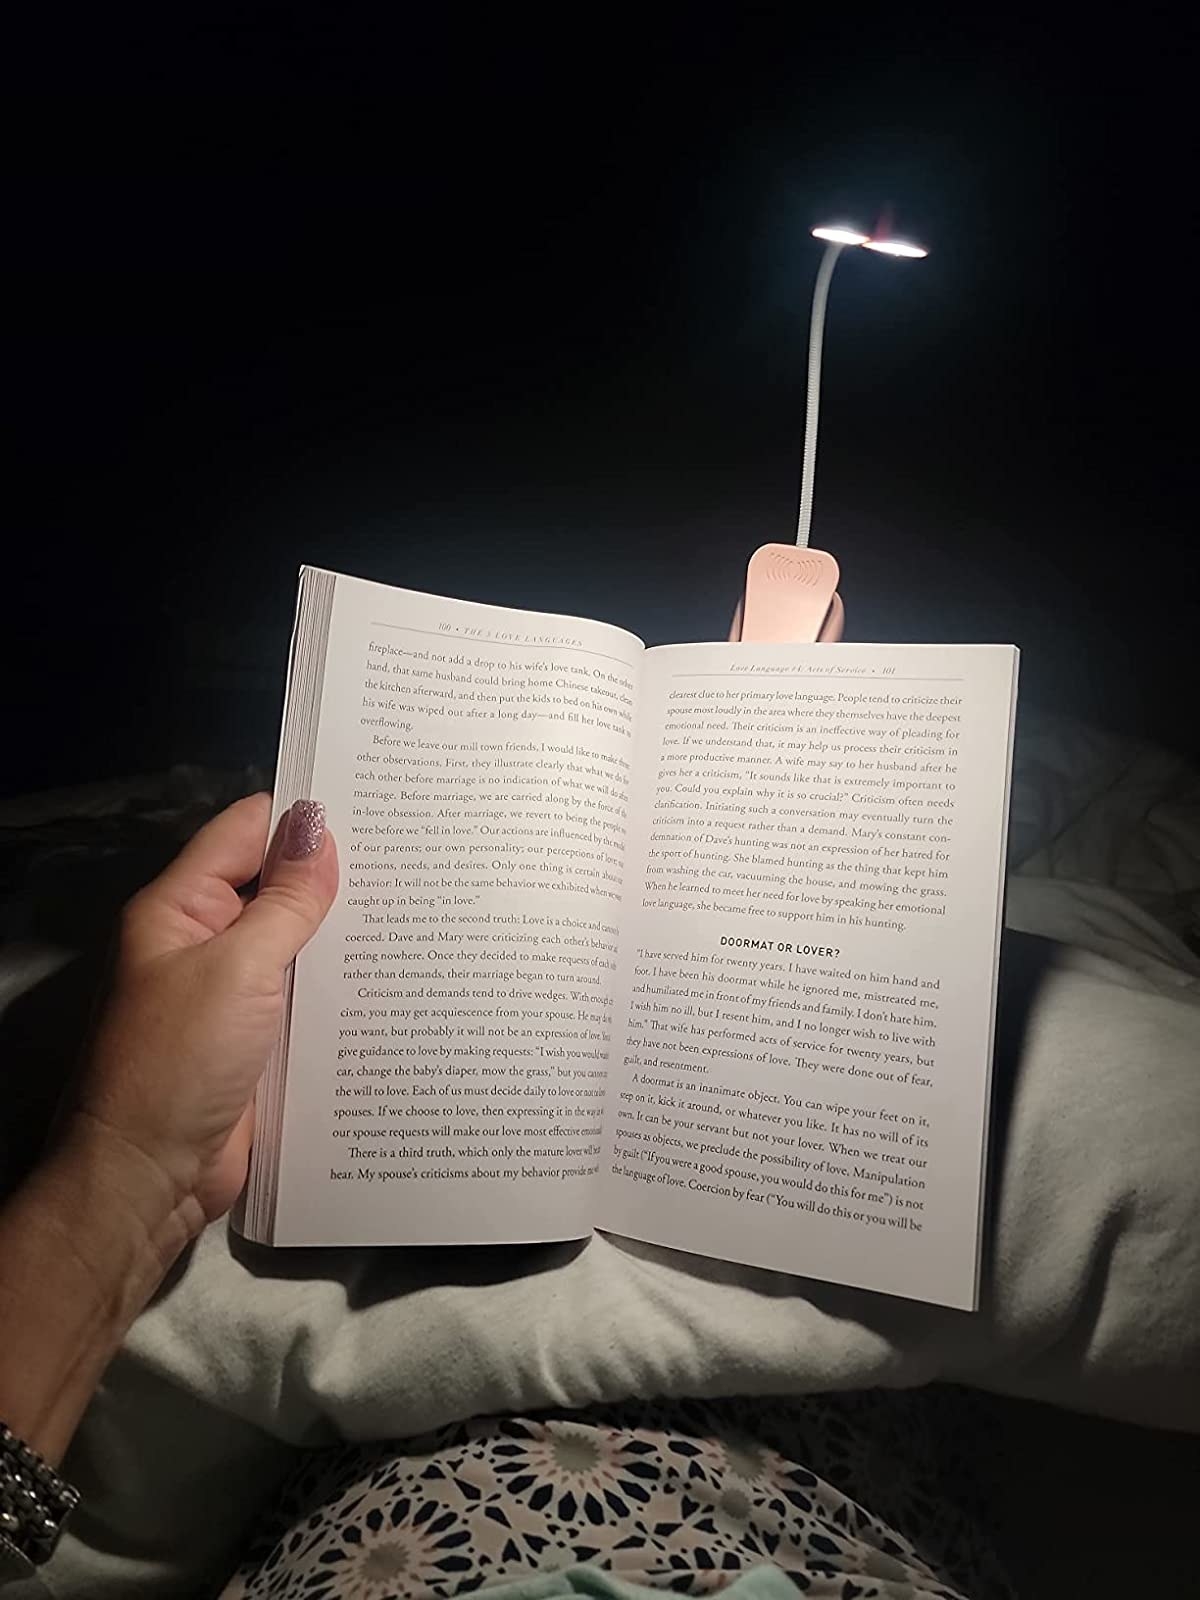 Reviewer using light to read in bed